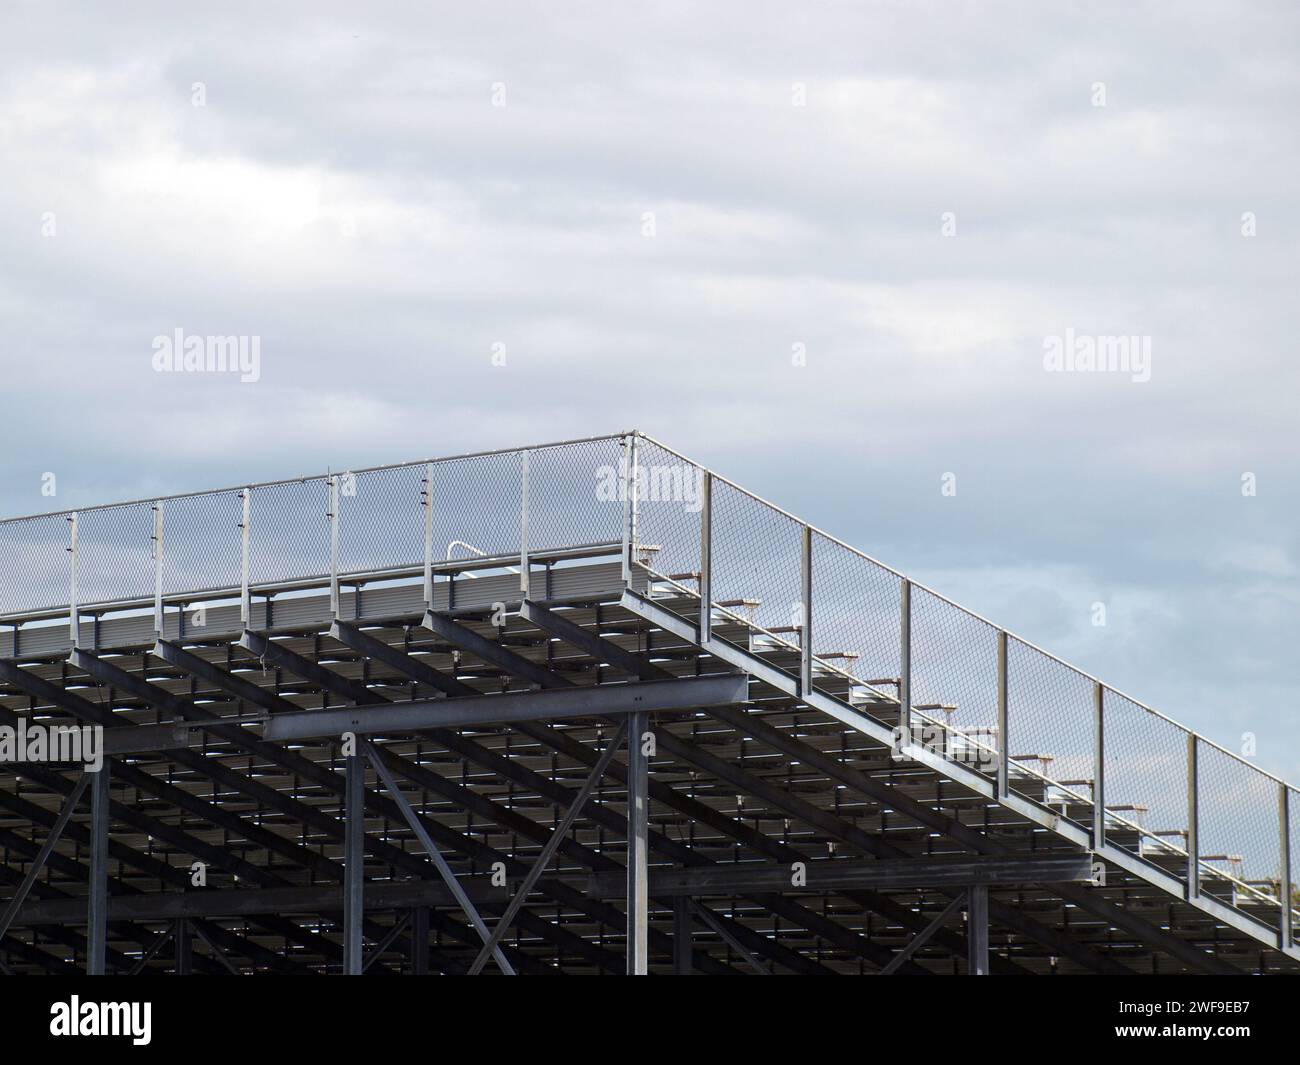 Metal stadium stands in a cloudy day of winter. Stock Photo